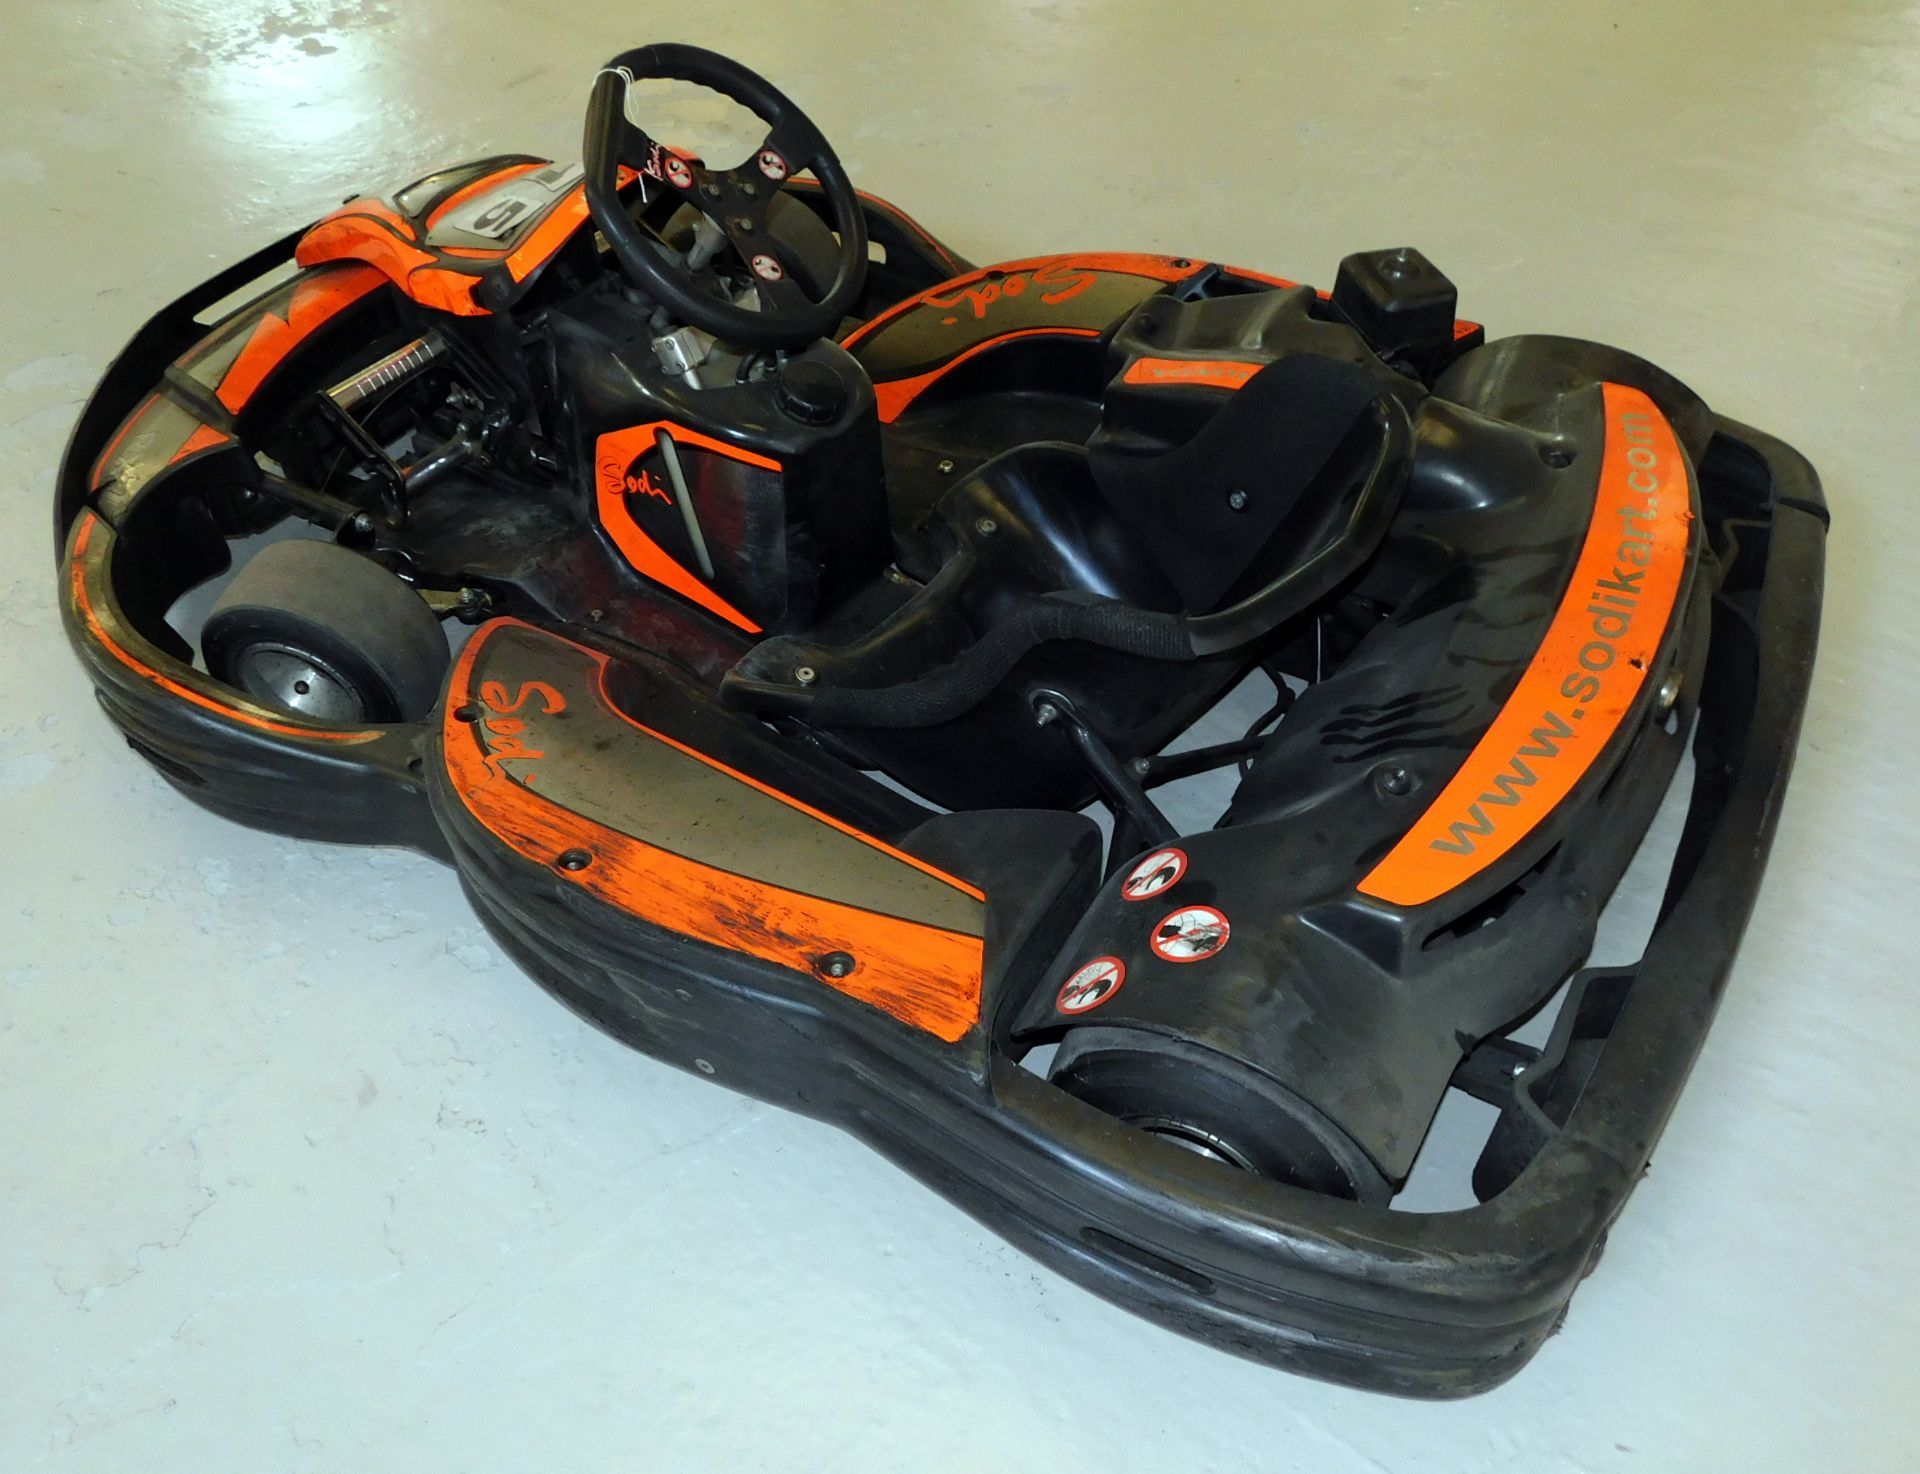 Sodi RX7 Petrol Powered Go-Kart with Honda GX200 Engine (located in Bredbury, collection Friday 20th - Image 3 of 5